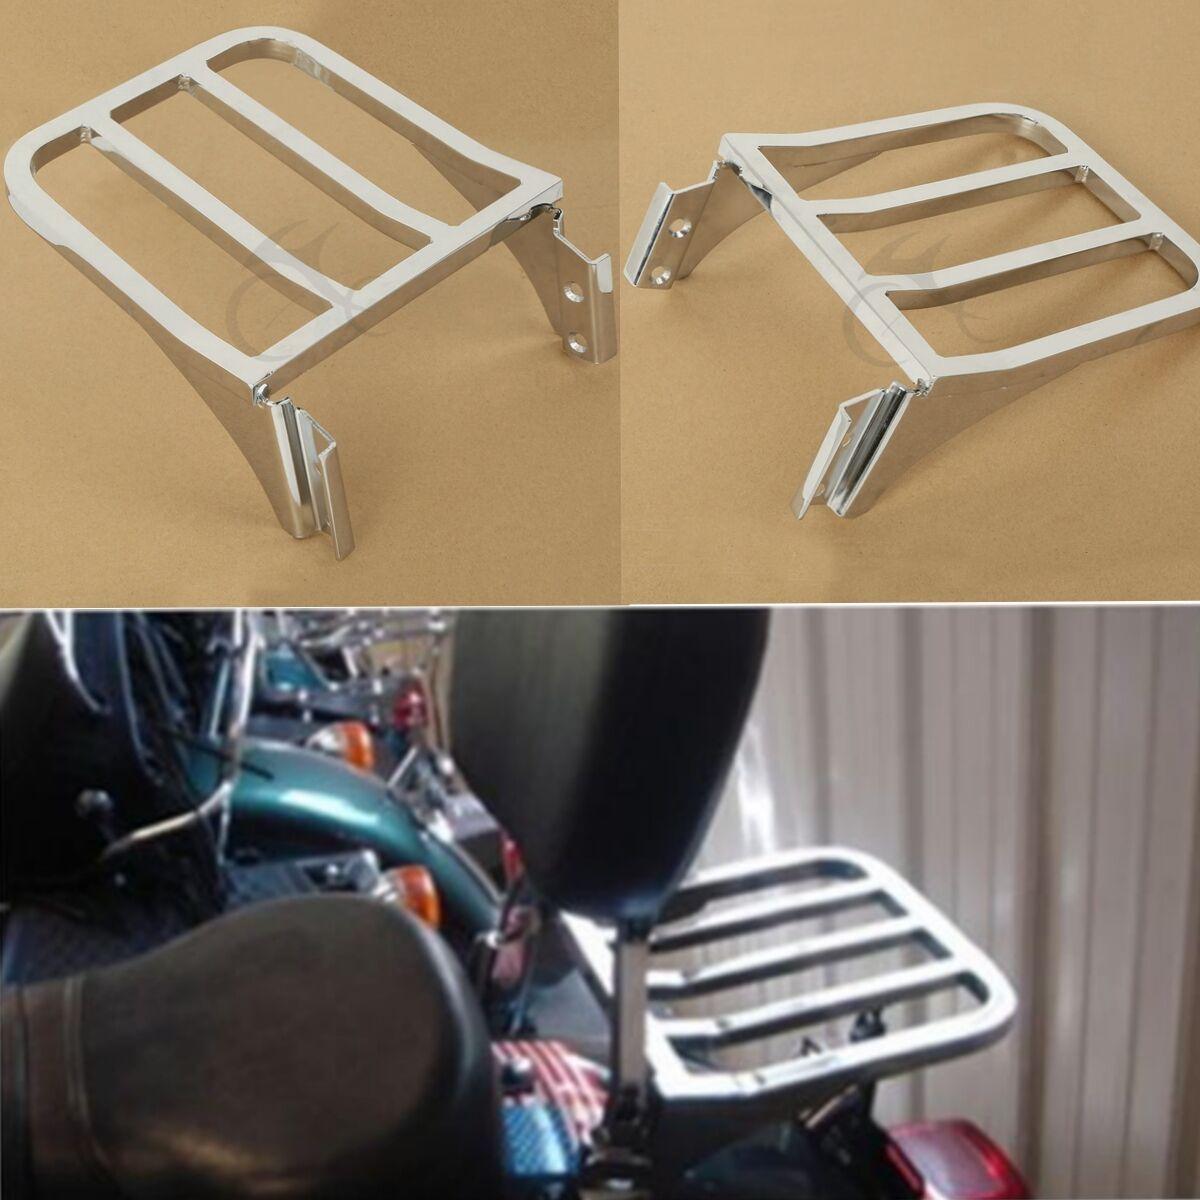 Moto Sissy Bar Backrest Luggage Rack For Harley Sportster 883 1200 XL 2004-Up - Moto Life Products